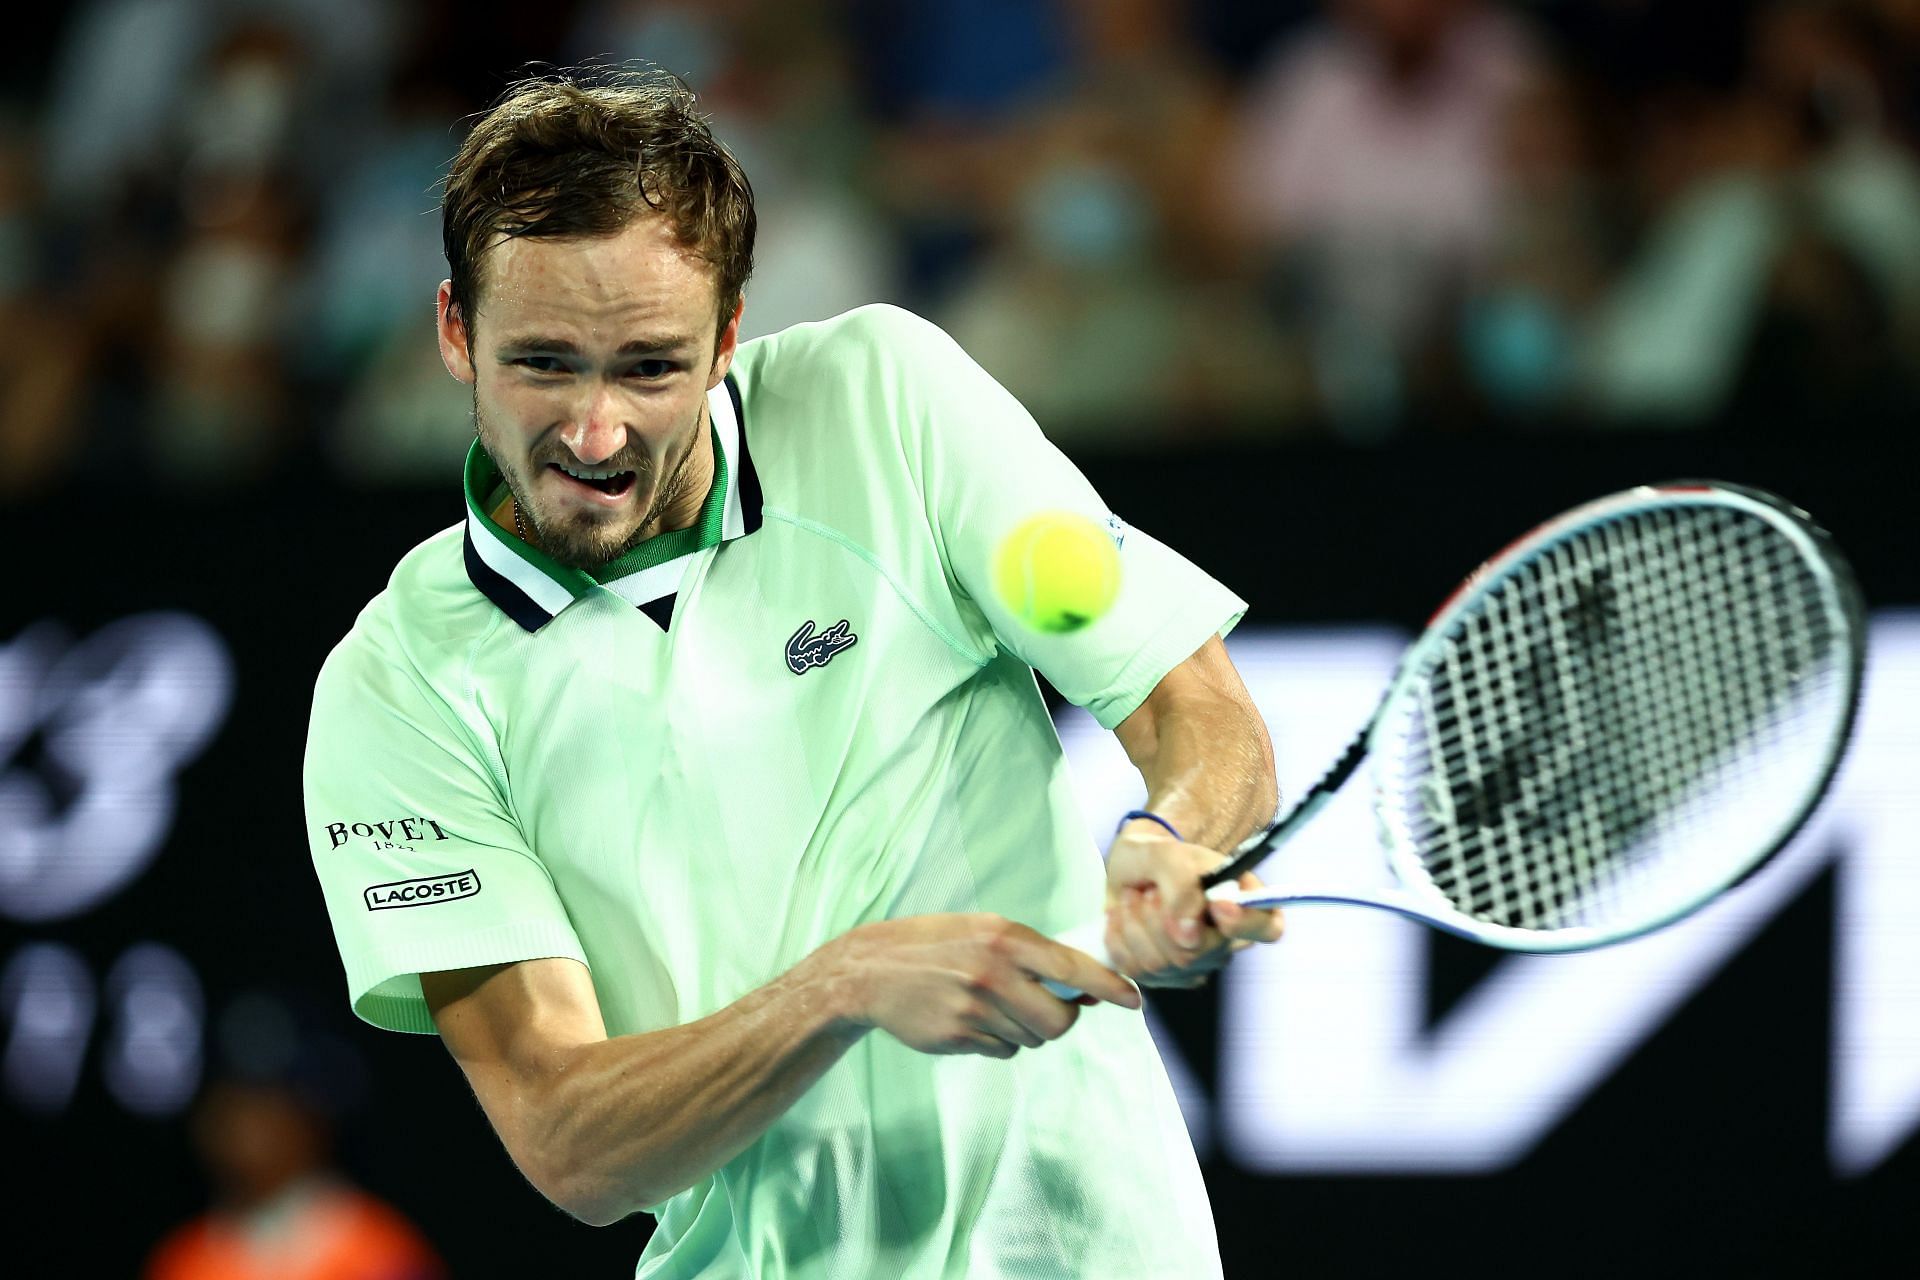 A victory at the 2022 Australian Open would have led to Daniil Medvedev becoming the World No. 1